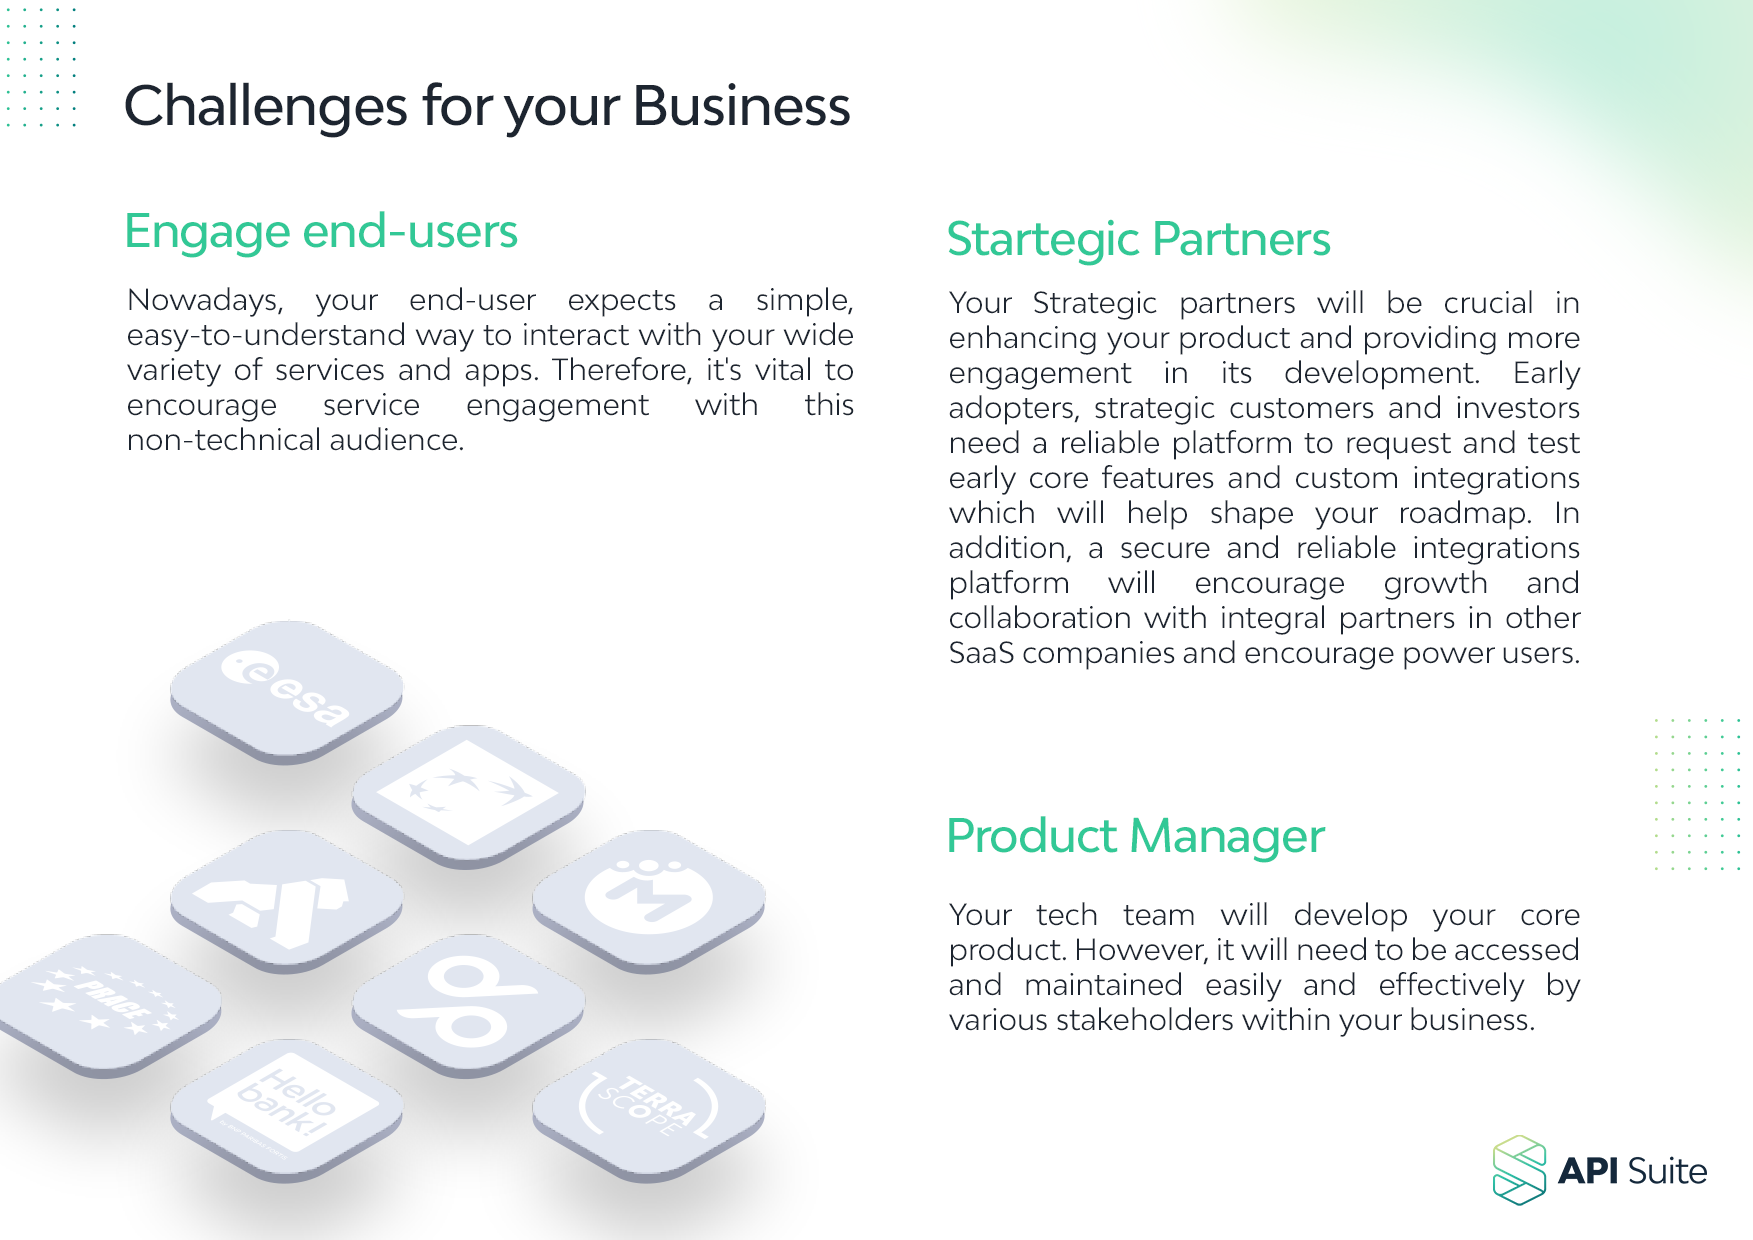 Challenges for your business